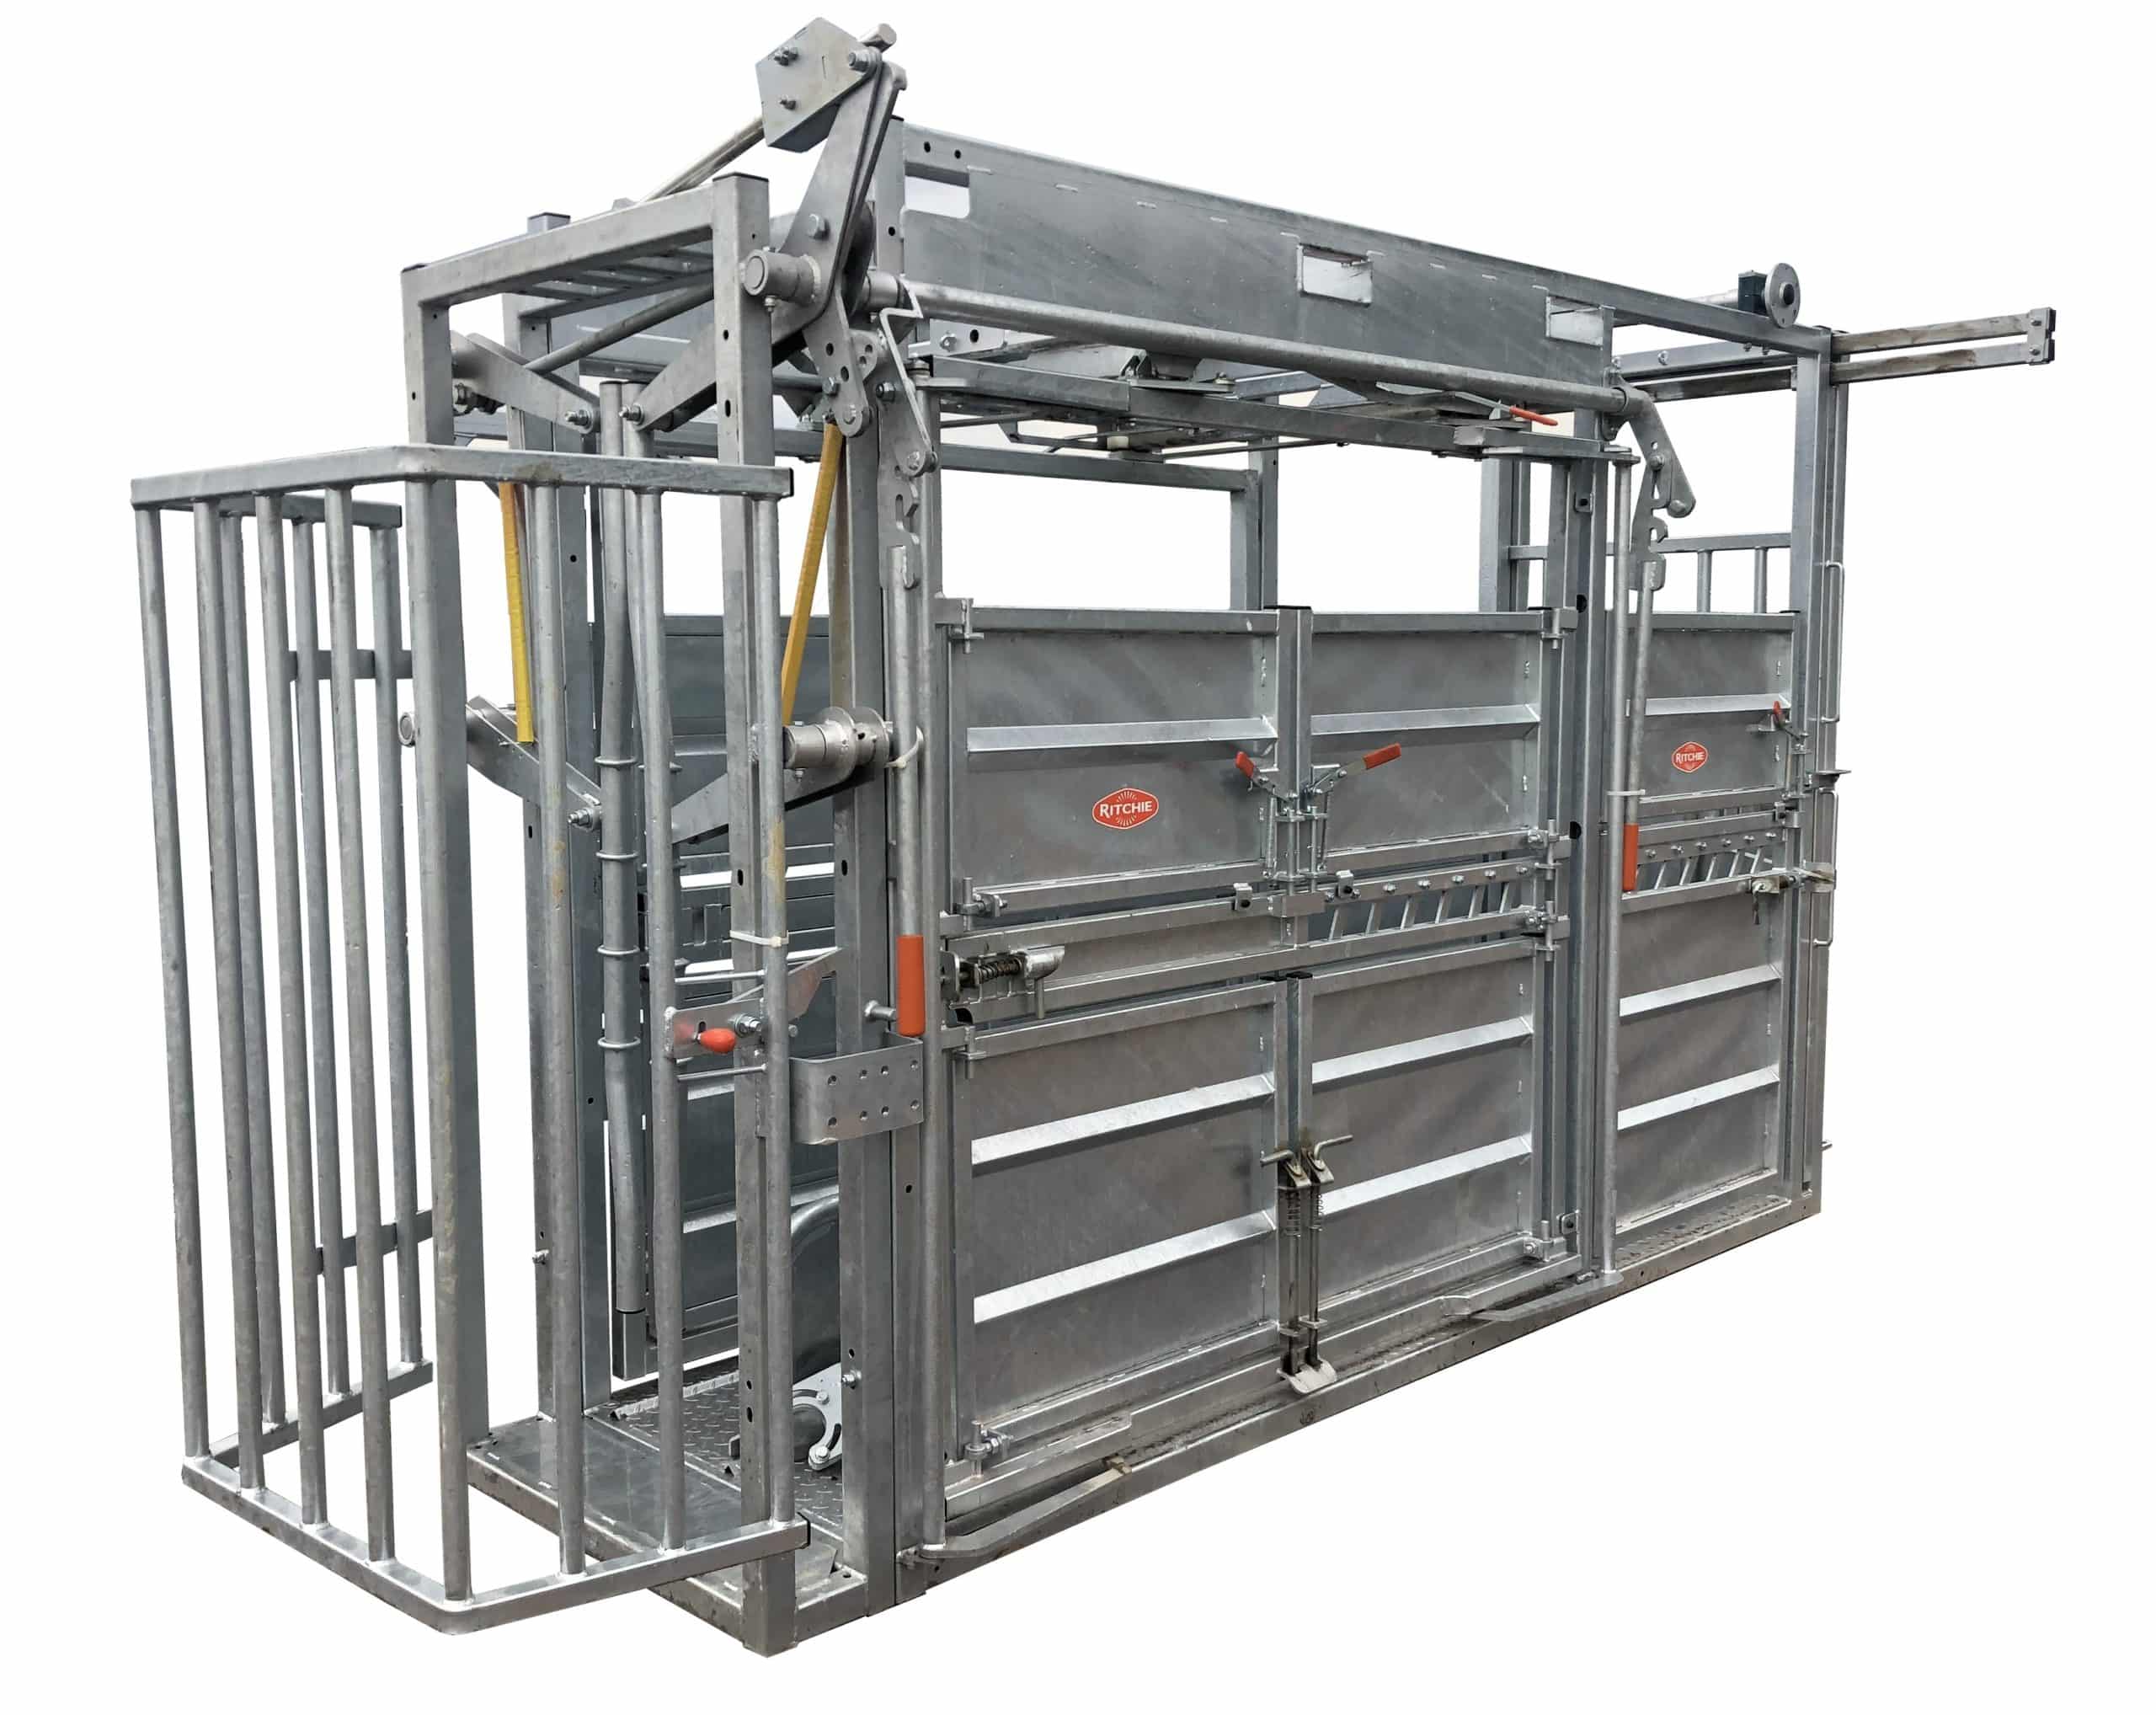 Ritchie Squeeze Crate with Manual Yoke